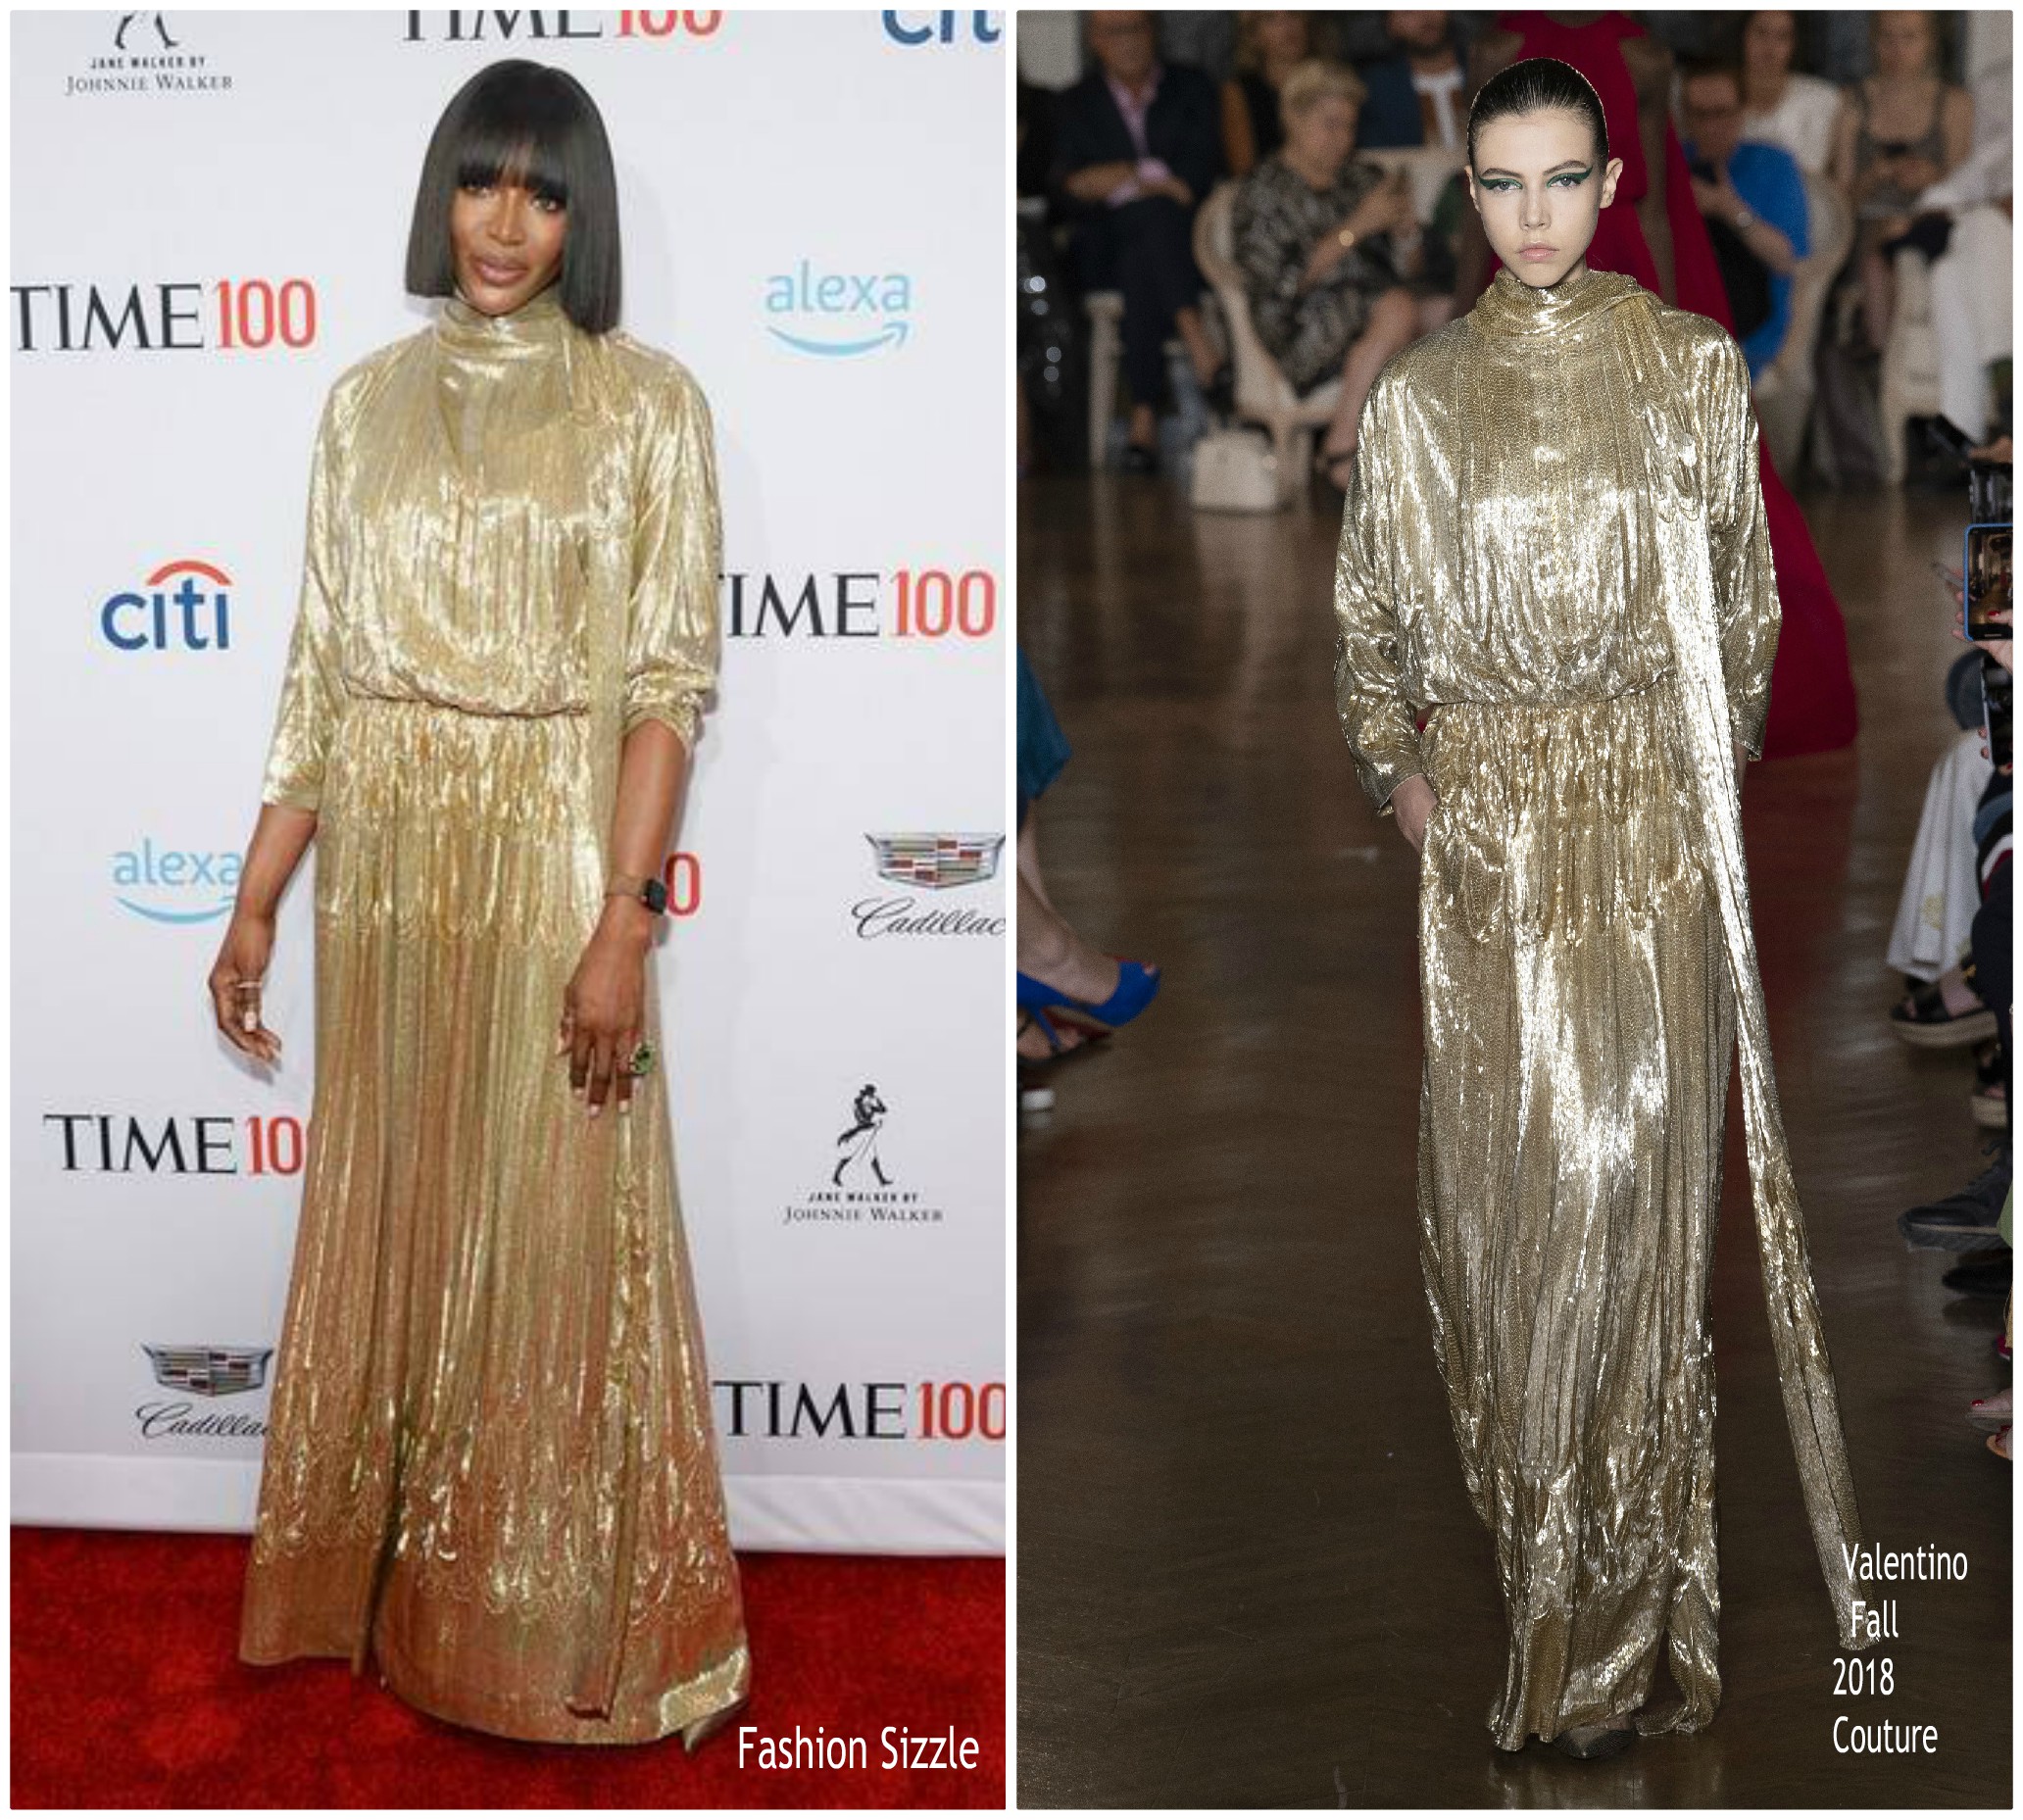 Naomi Campbell In Valentino Couture @ Time 100 Gala